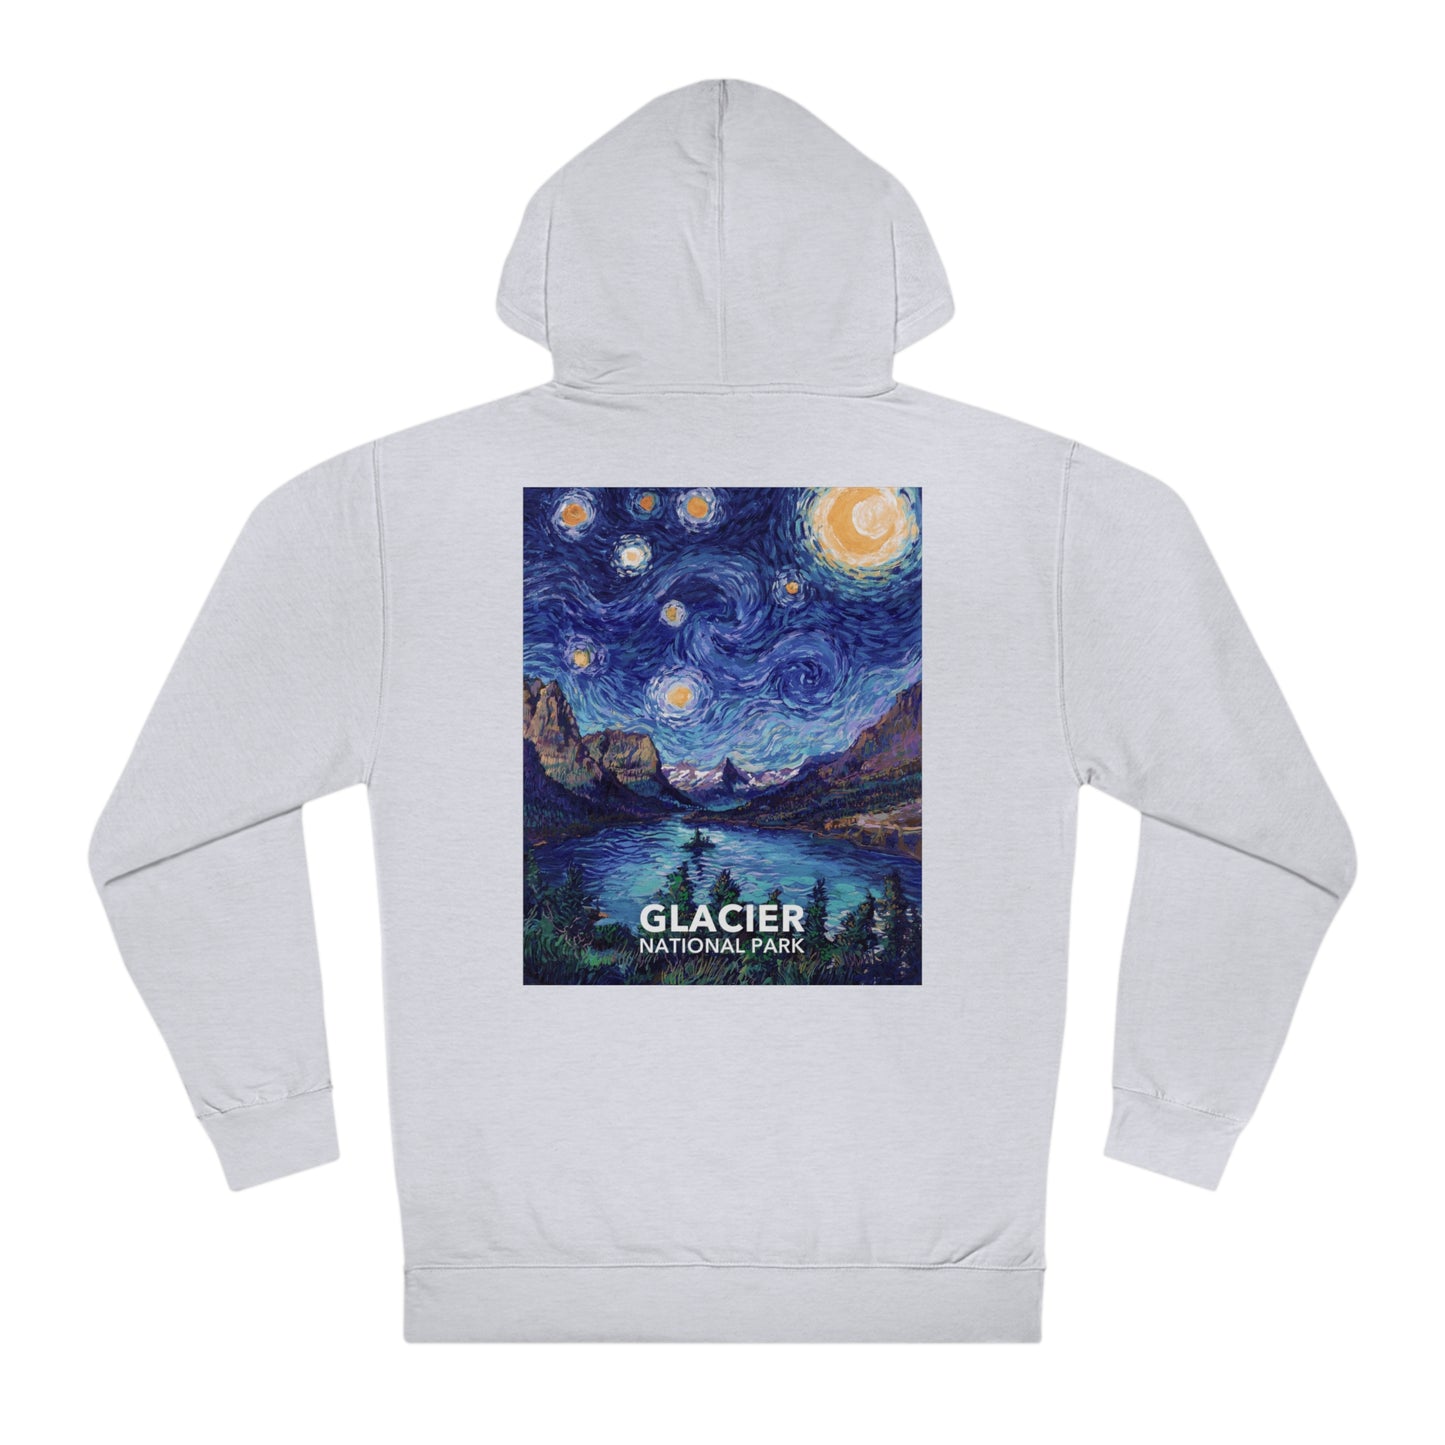 Glacier National Park Hoodie - The Starry Night